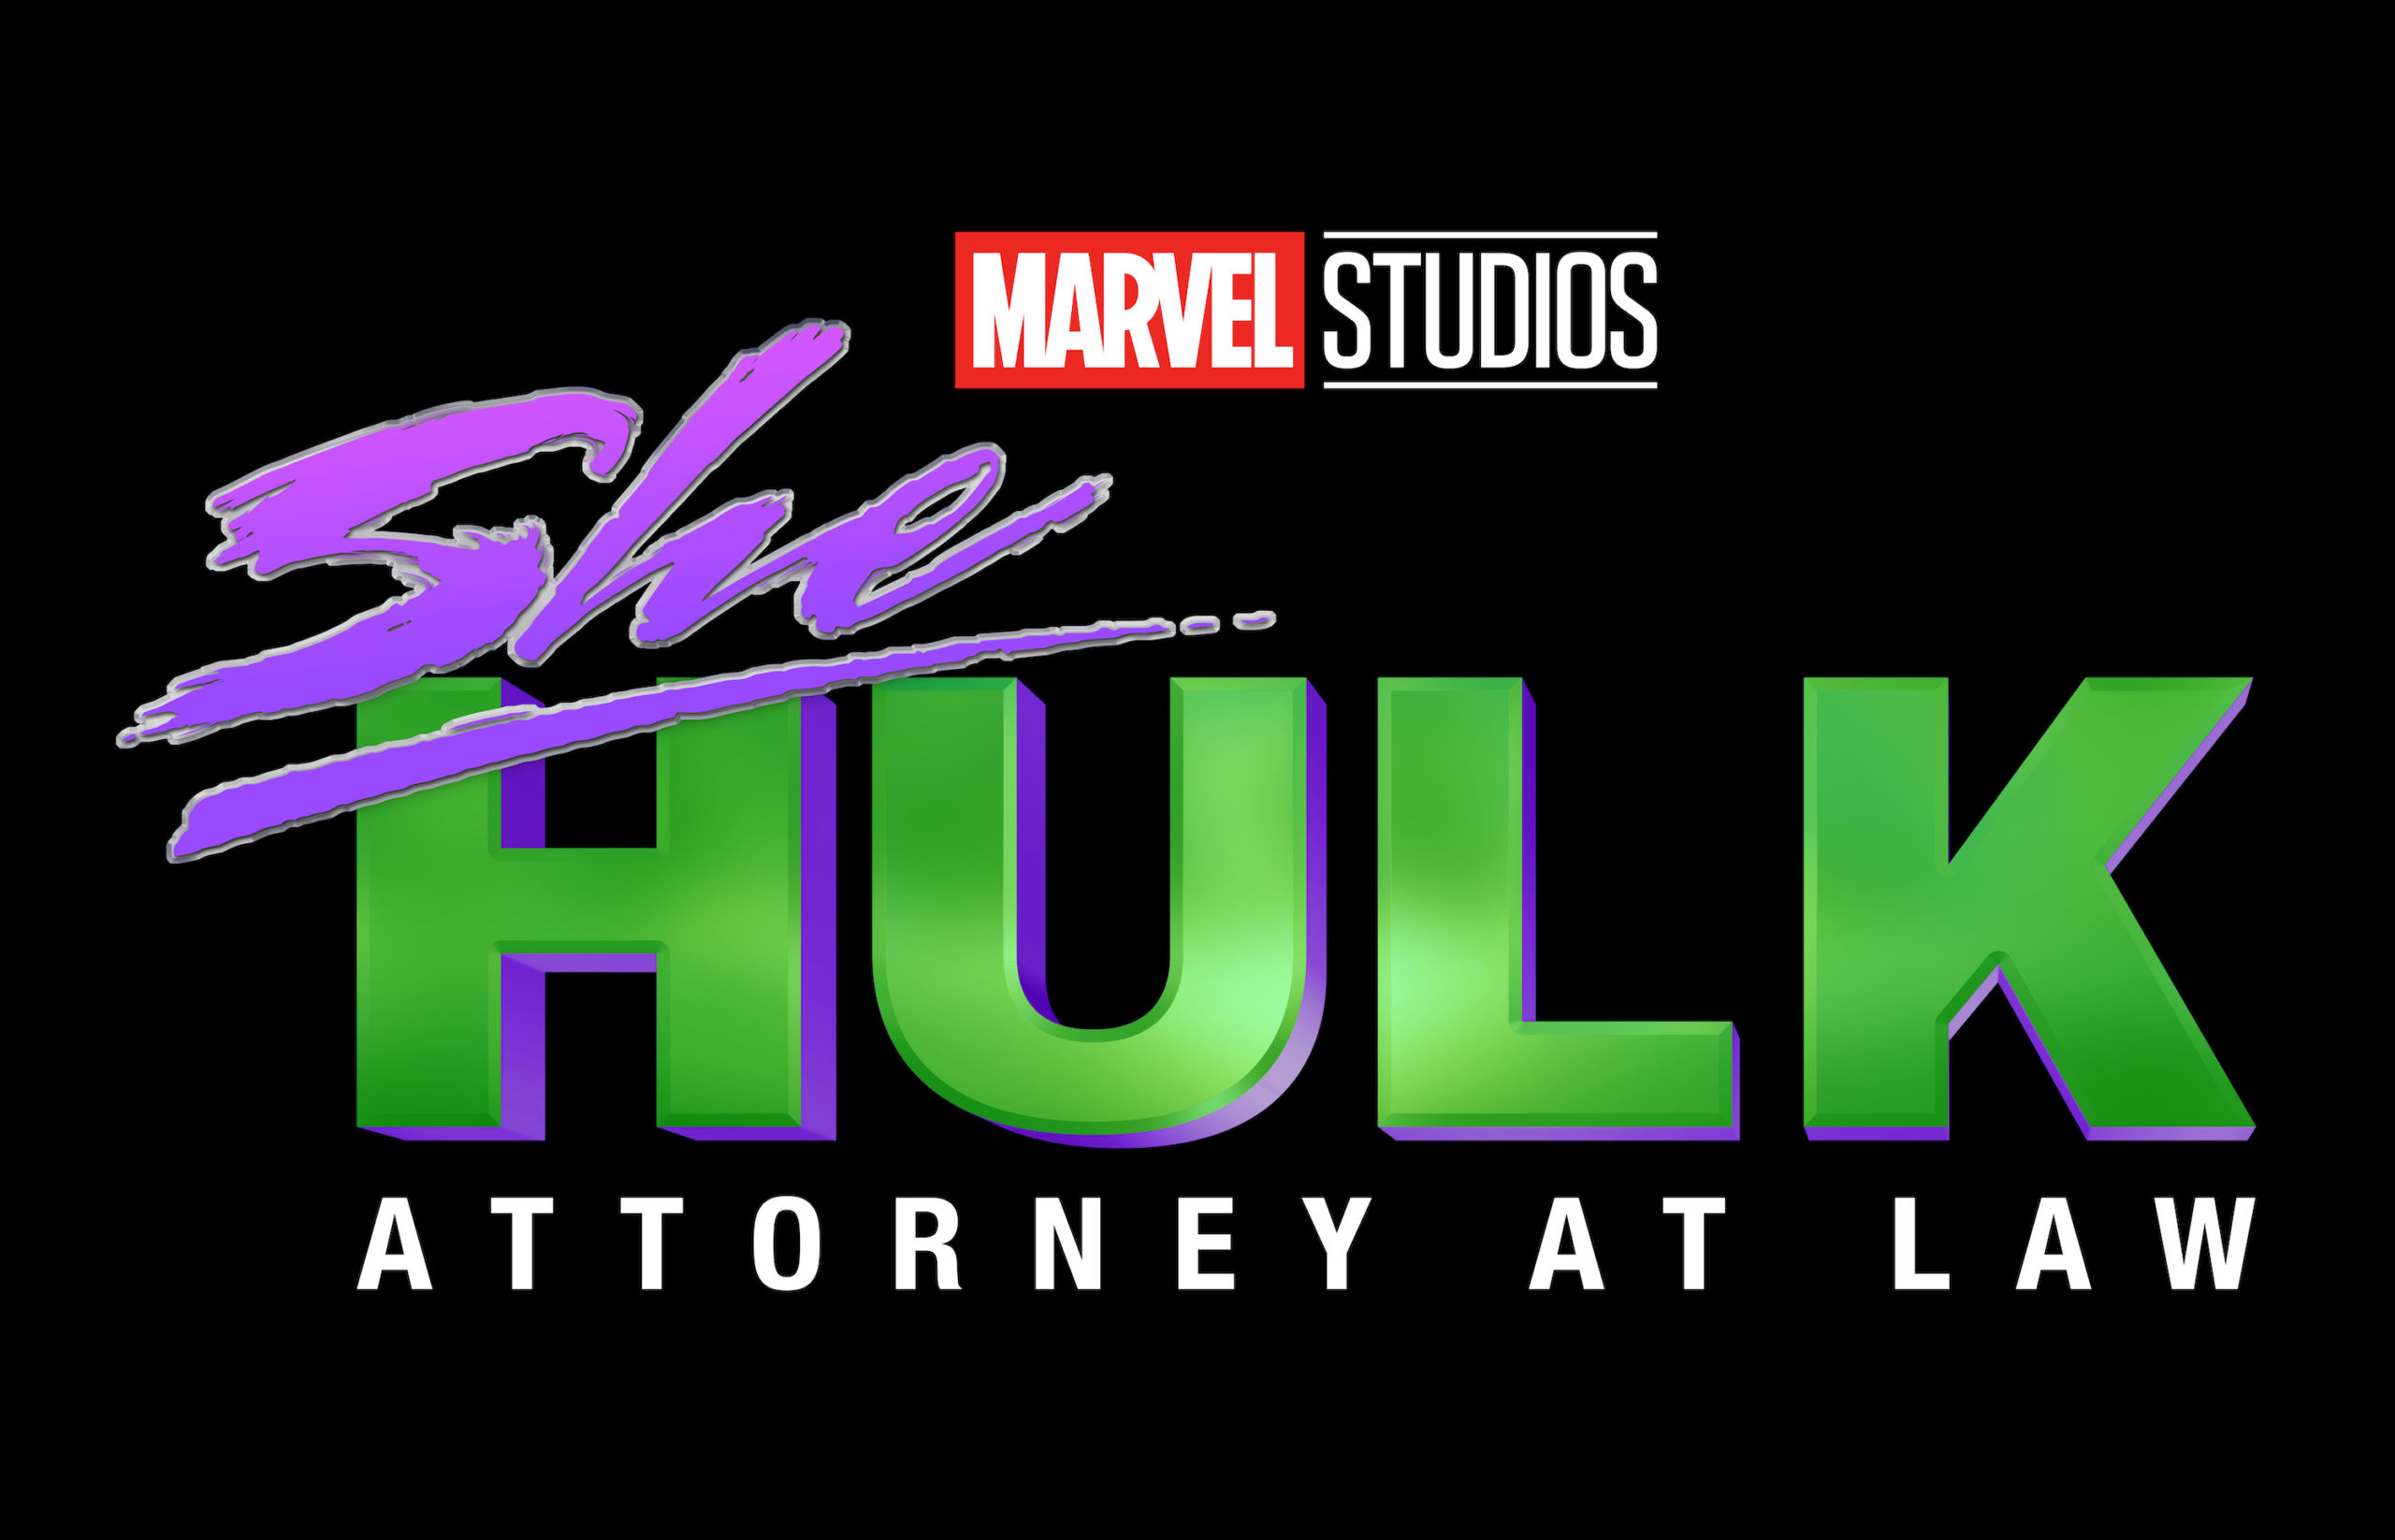 She-Hulk Season 2 Not Happening Would Waste So Much MCU Potential